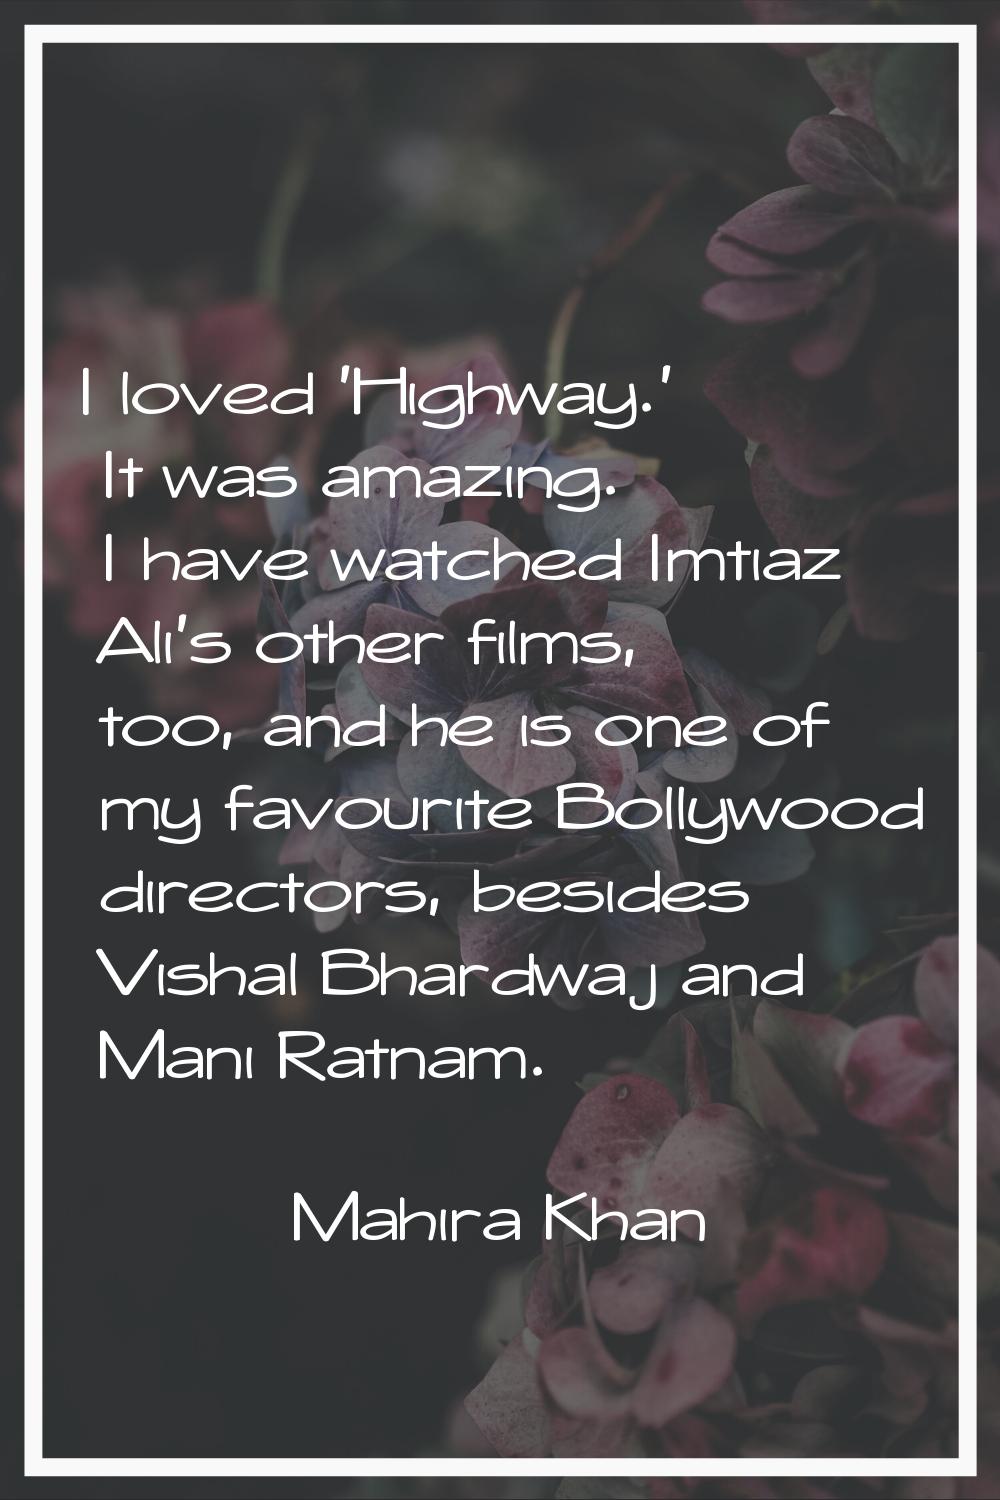 I loved 'Highway.' It was amazing. I have watched Imtiaz Ali's other films, too, and he is one of m